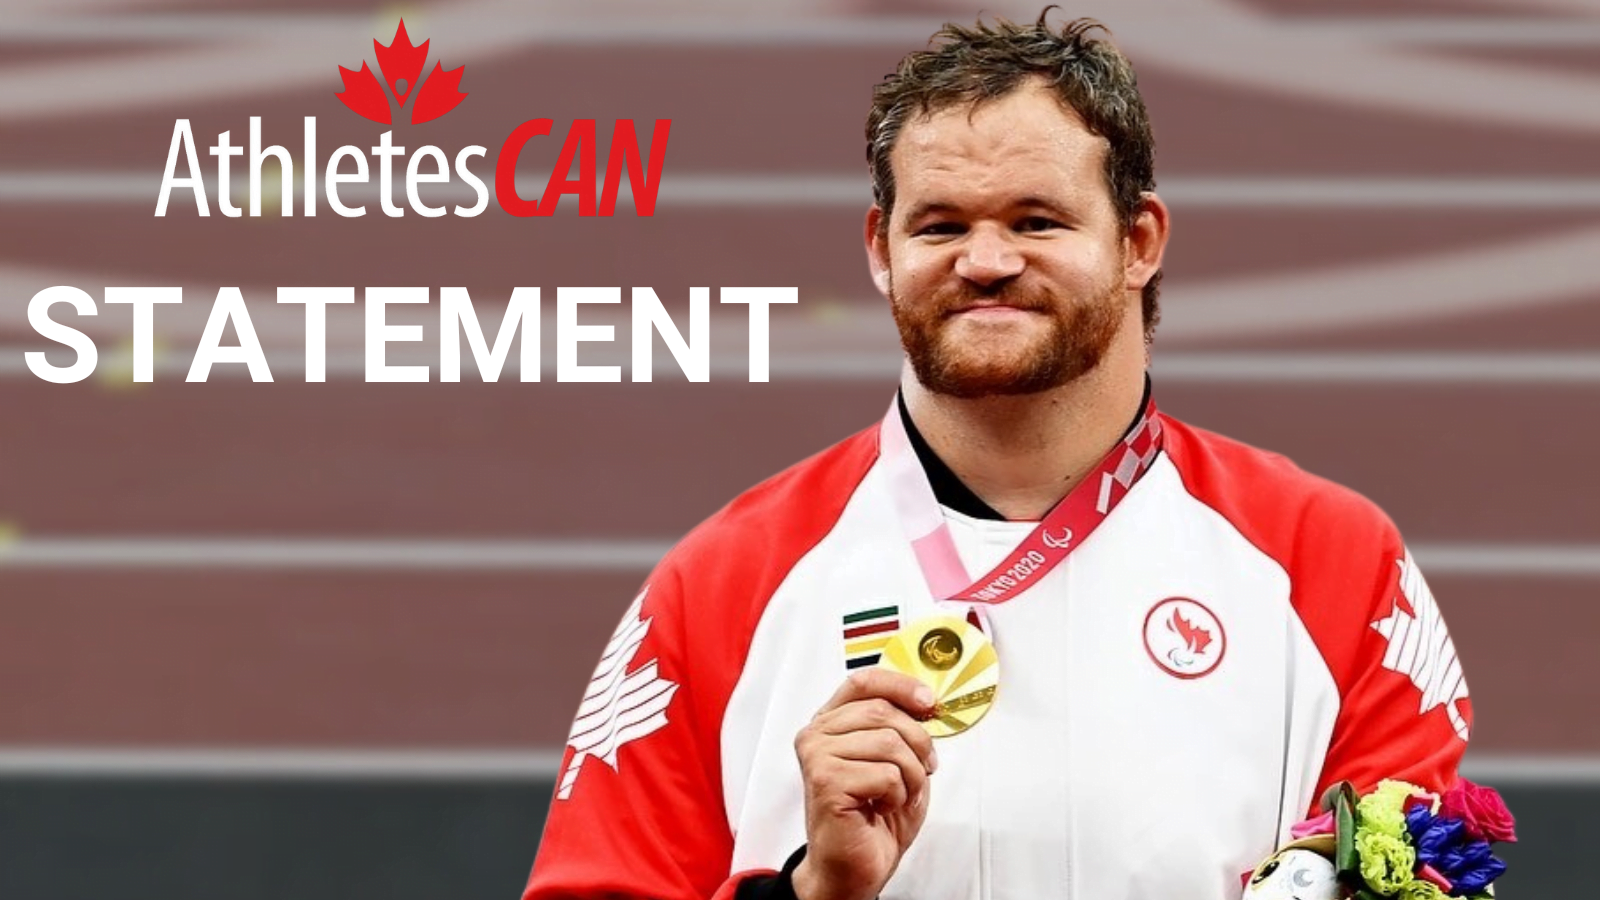 Statement: AthletesCAN celebrates financial recognition equality for Canadian Paralympic podium performances